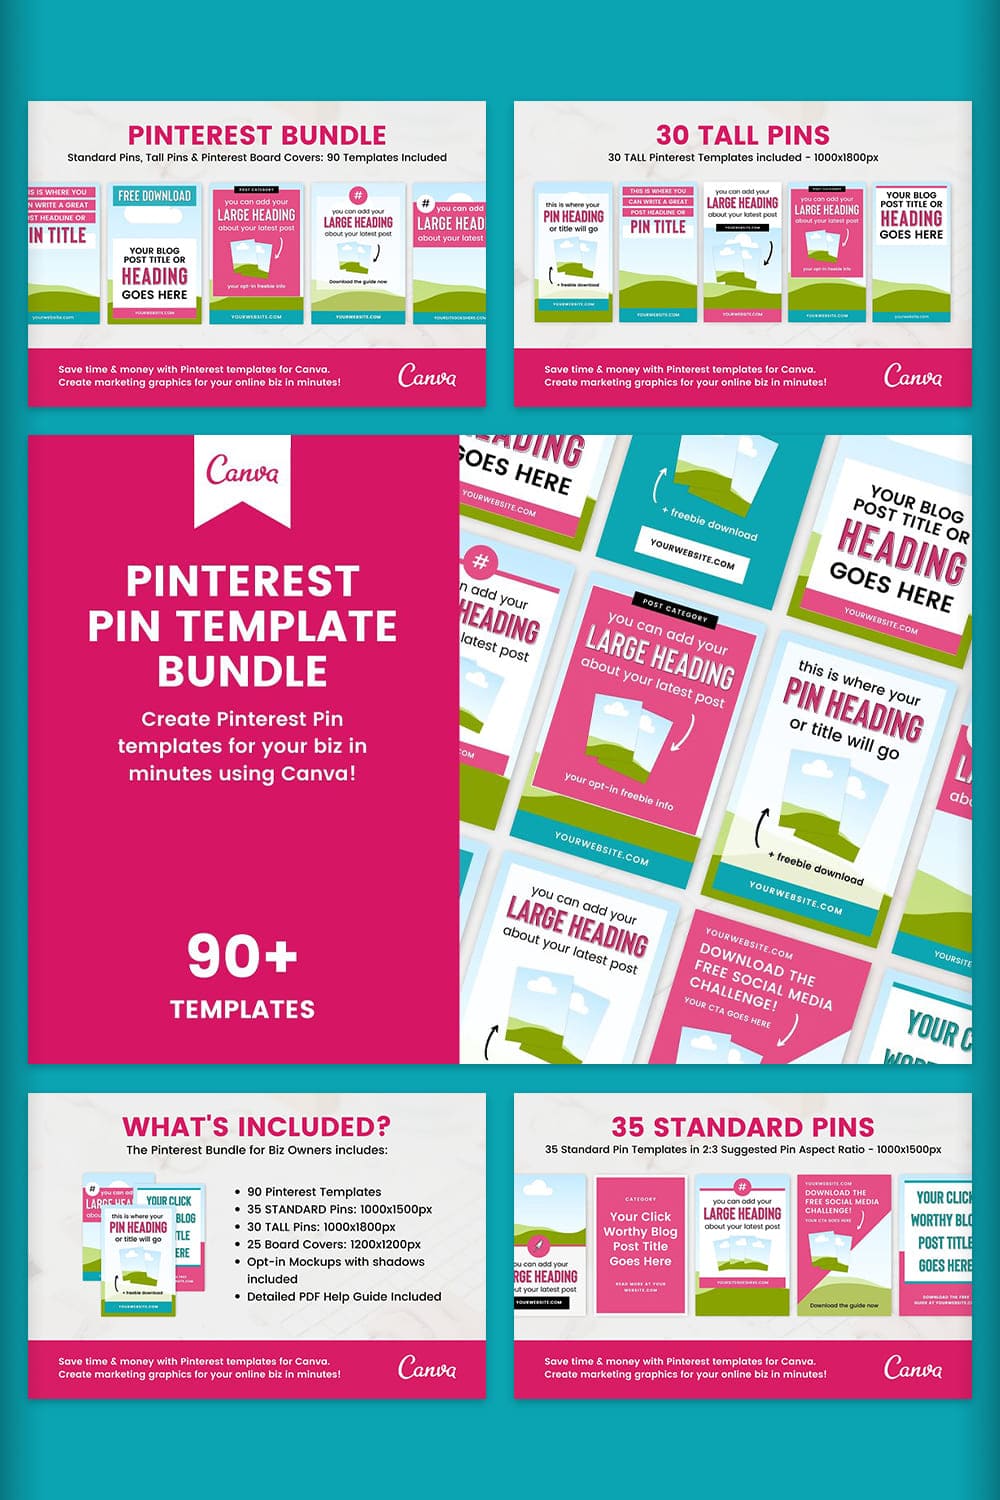 Pinterest Pin Template Bundle - "Create Pinterest Pin Templates For Your Biz In Minutes Using Canva!" - 90+ Templates.